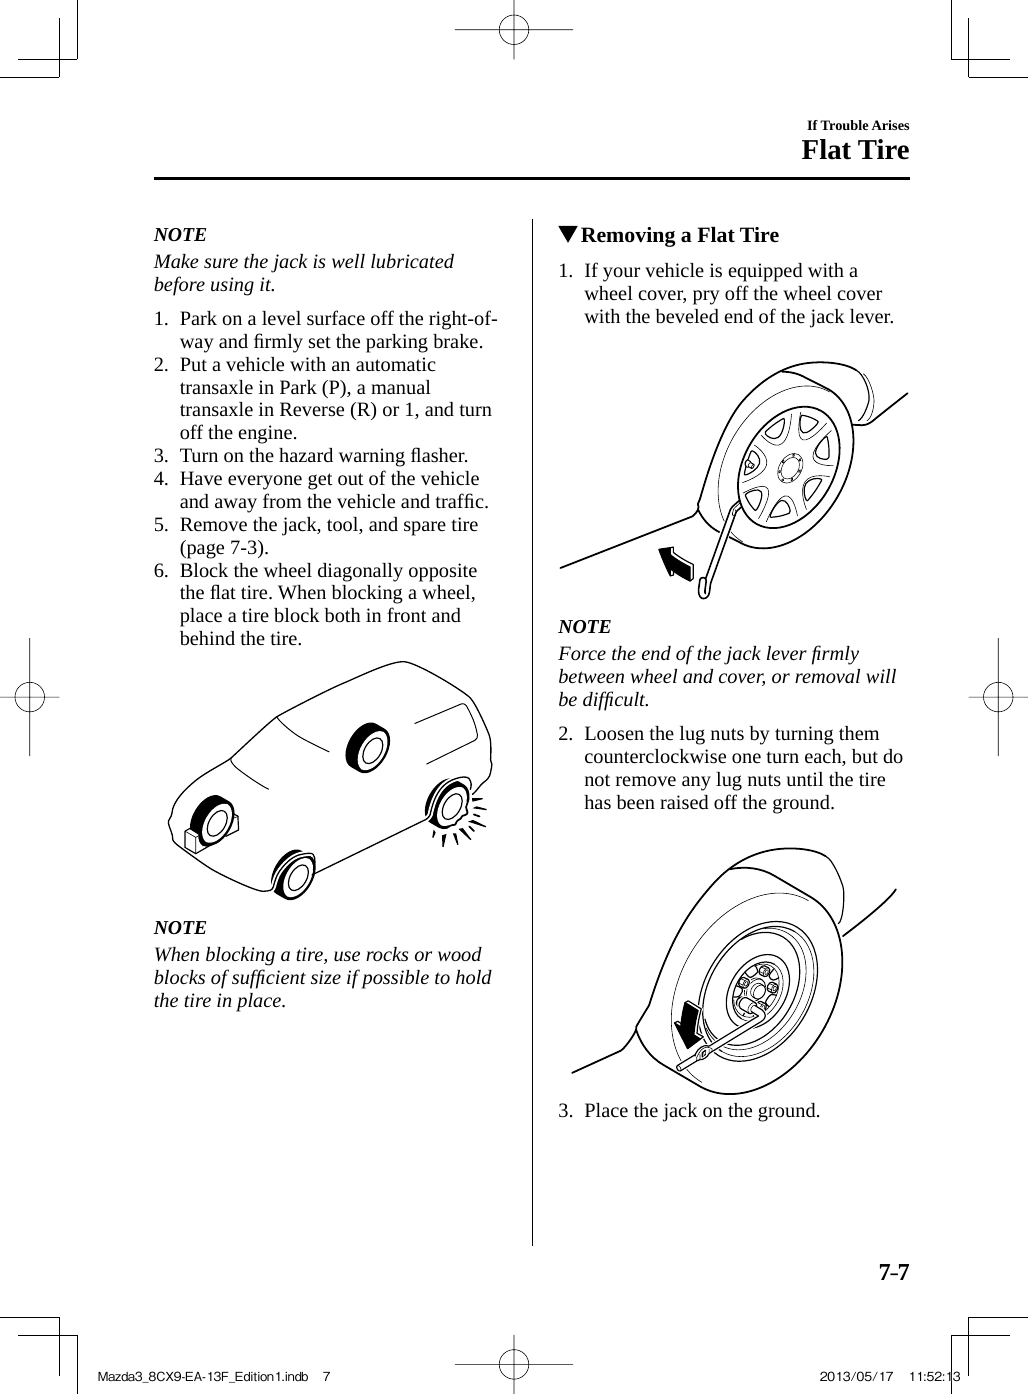 7–7If Trouble ArisesFlat Tire   NOTE  Make sure the jack is well lubricated before using it.      1.   Park on a level surface off the right-of-way and ﬁ rmly set the parking brake.   2.   Put a vehicle with an automatic transaxle in Park (P), a manual transaxle in Reverse (R) or 1, and turn off the engine.   3.   Turn  on  the  hazard  warning  ﬂ asher.   4.   Have everyone get out of the vehicle and away from the vehicle and trafﬁ c.   5.   Remove the jack, tool, and spare tire (page   7-3 ).   6.   Block  the  wheel  diagonally  opposite the ﬂ at tire. When blocking a wheel, place a tire block both in front and behind the tire.     NOTE  When blocking a tire, use rocks or wood blocks of sufﬁ cient size if possible to hold the tire in place.              Removing a Flat Tire             1.   If  your  vehicle  is  equipped  with  a wheel cover, pry off the wheel cover with the beveled end of the jack lever.        NOTE  Force the end of the jack lever ﬁ rmly between wheel and cover, or removal will be difﬁ cult.      2.   Loosen the lug nuts by turning them counterclockwise one turn each, but do not remove any lug nuts until the tire has been raised off the ground.        3.   Place the jack on the ground.Mazda3_8CX9-EA-13F_Edition1.indb   7Mazda3_8CX9-EA-13F_Edition1.indb   7 2013/05/17   11:52:132013/05/17   11:52:13